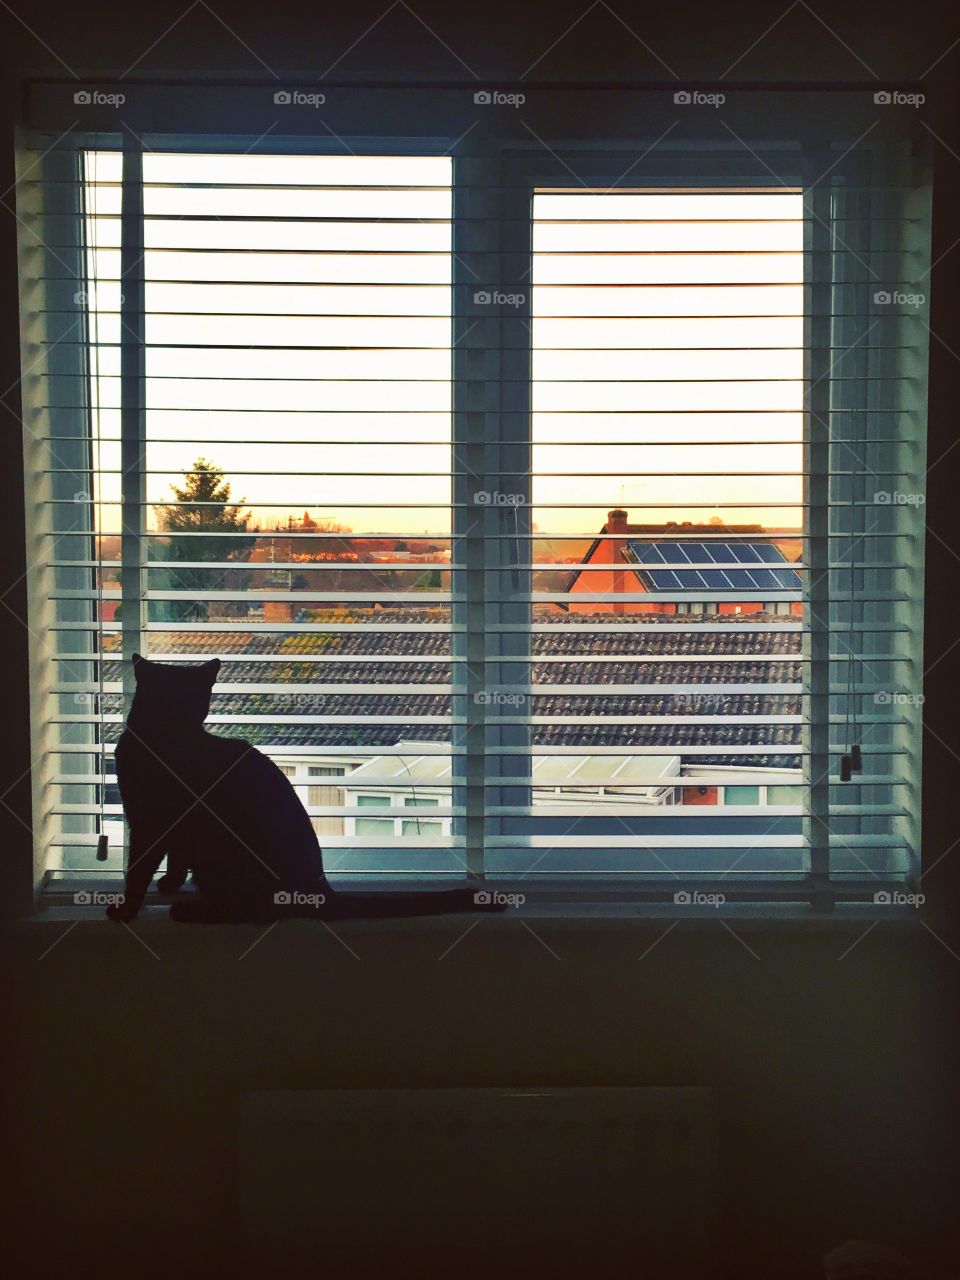 My gorgeous cat midnight. She loves staring out of the window in my room, maybe because the view is so cute 